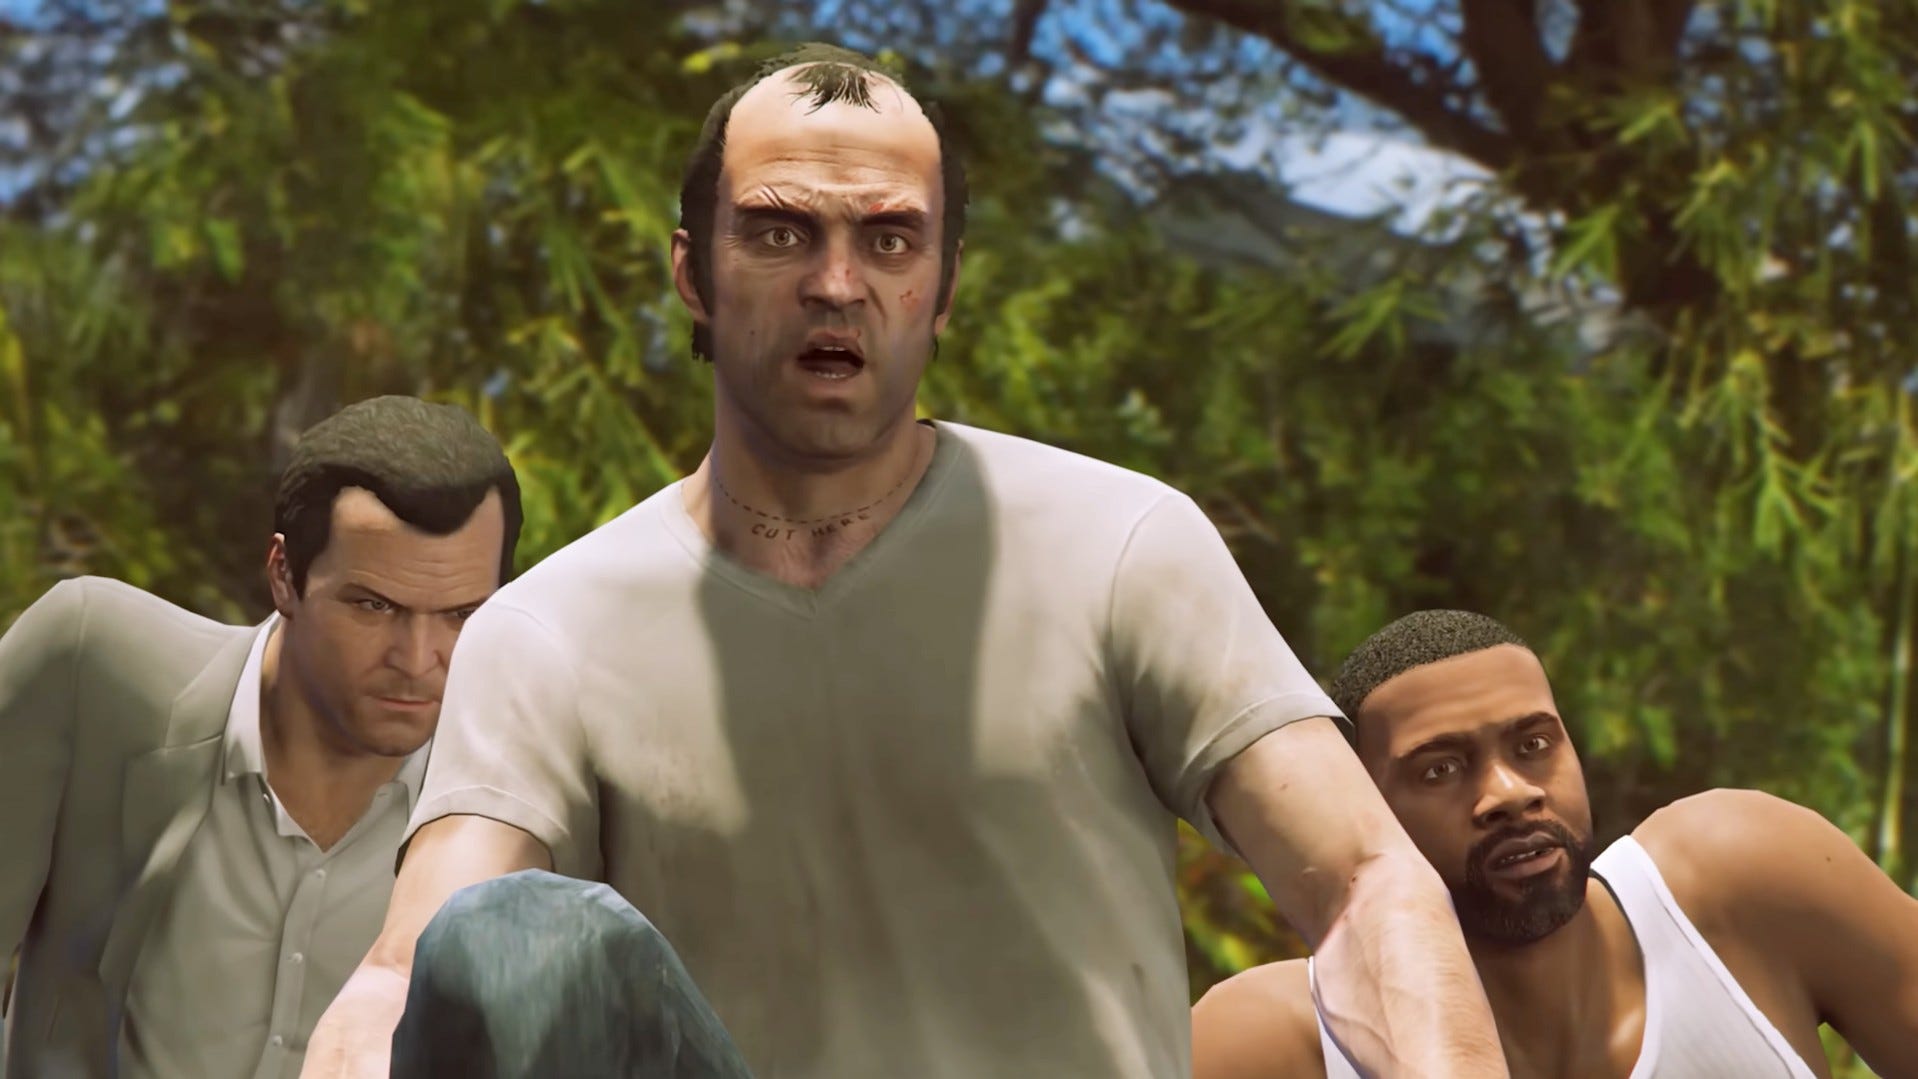 GTA 6 trailer reimagined with Franklin, Trevor, and Michael as the protagonists